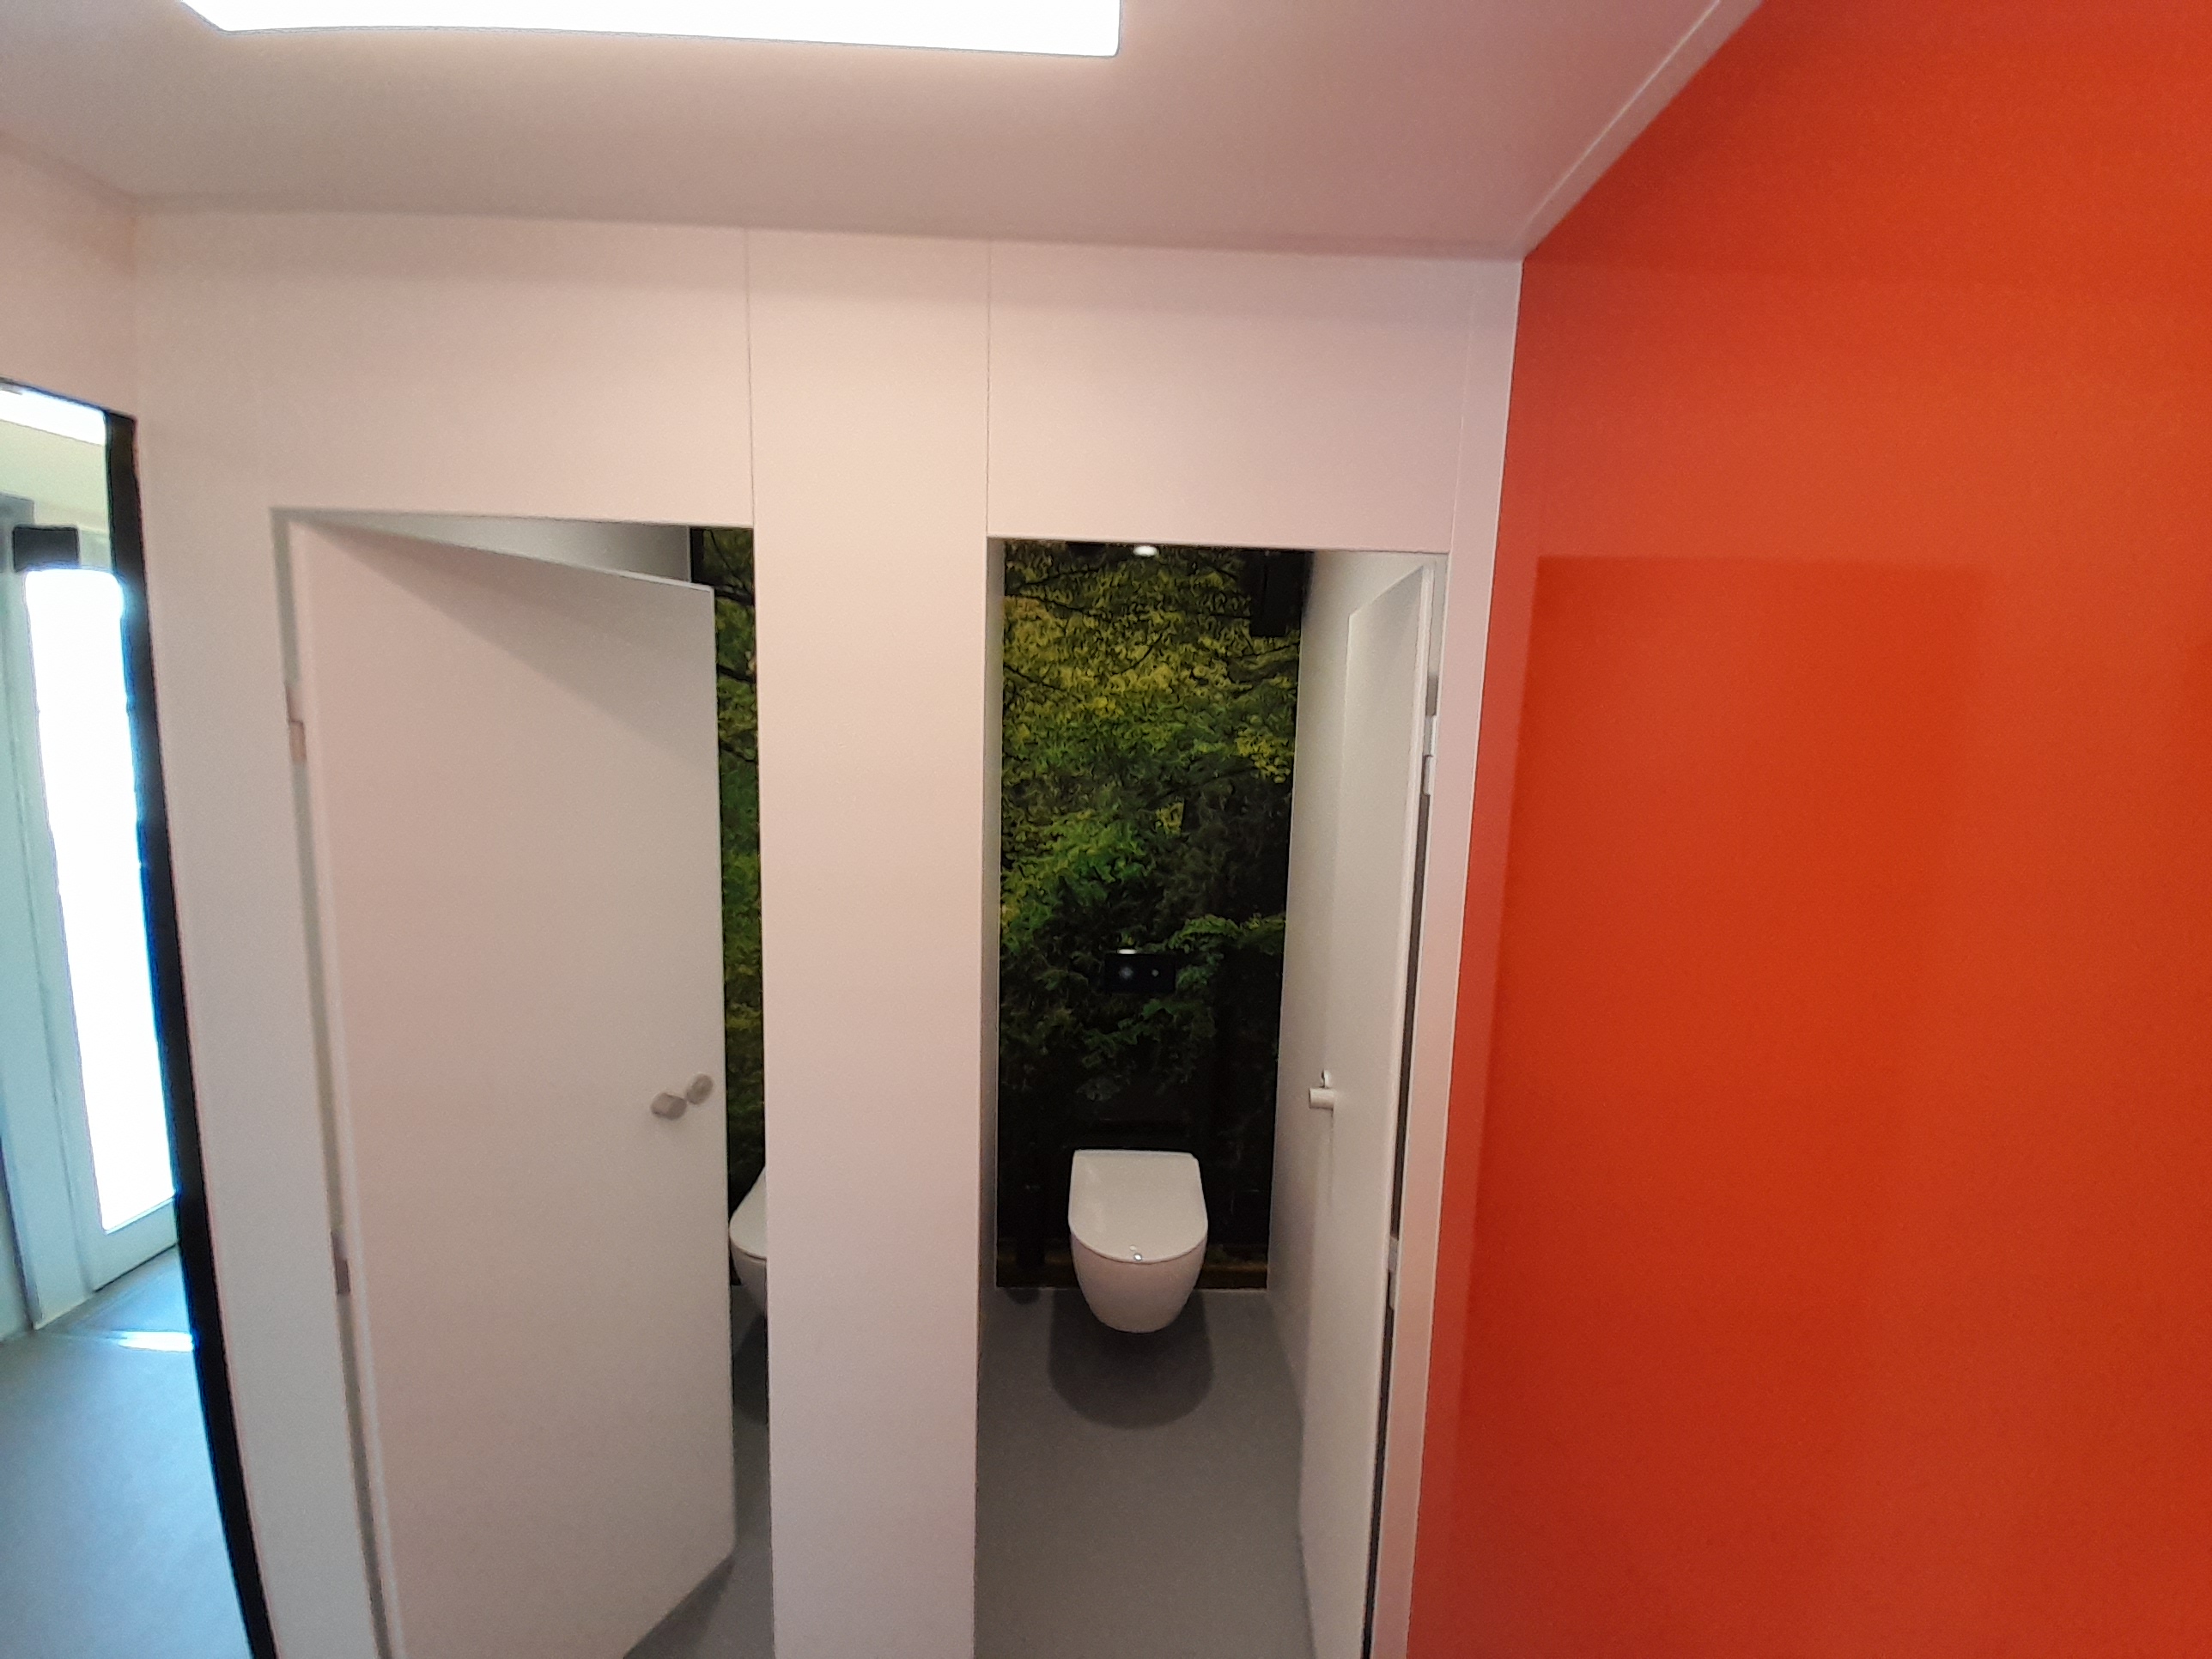 WC-Trennwand in mobilen Container